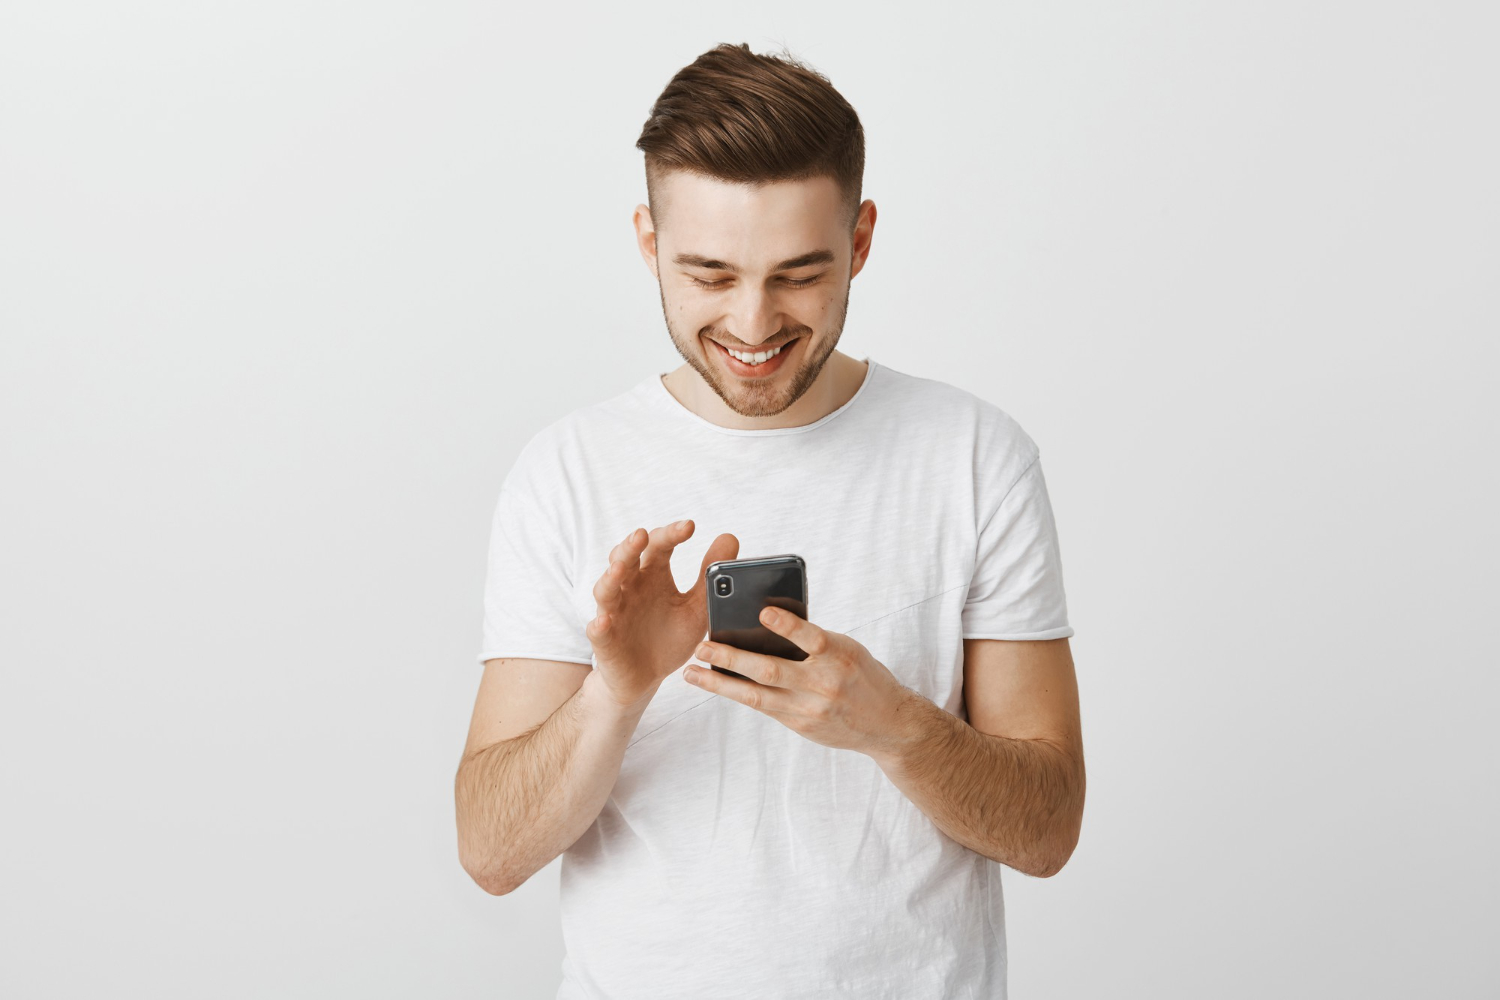 Young man using phone while smiling